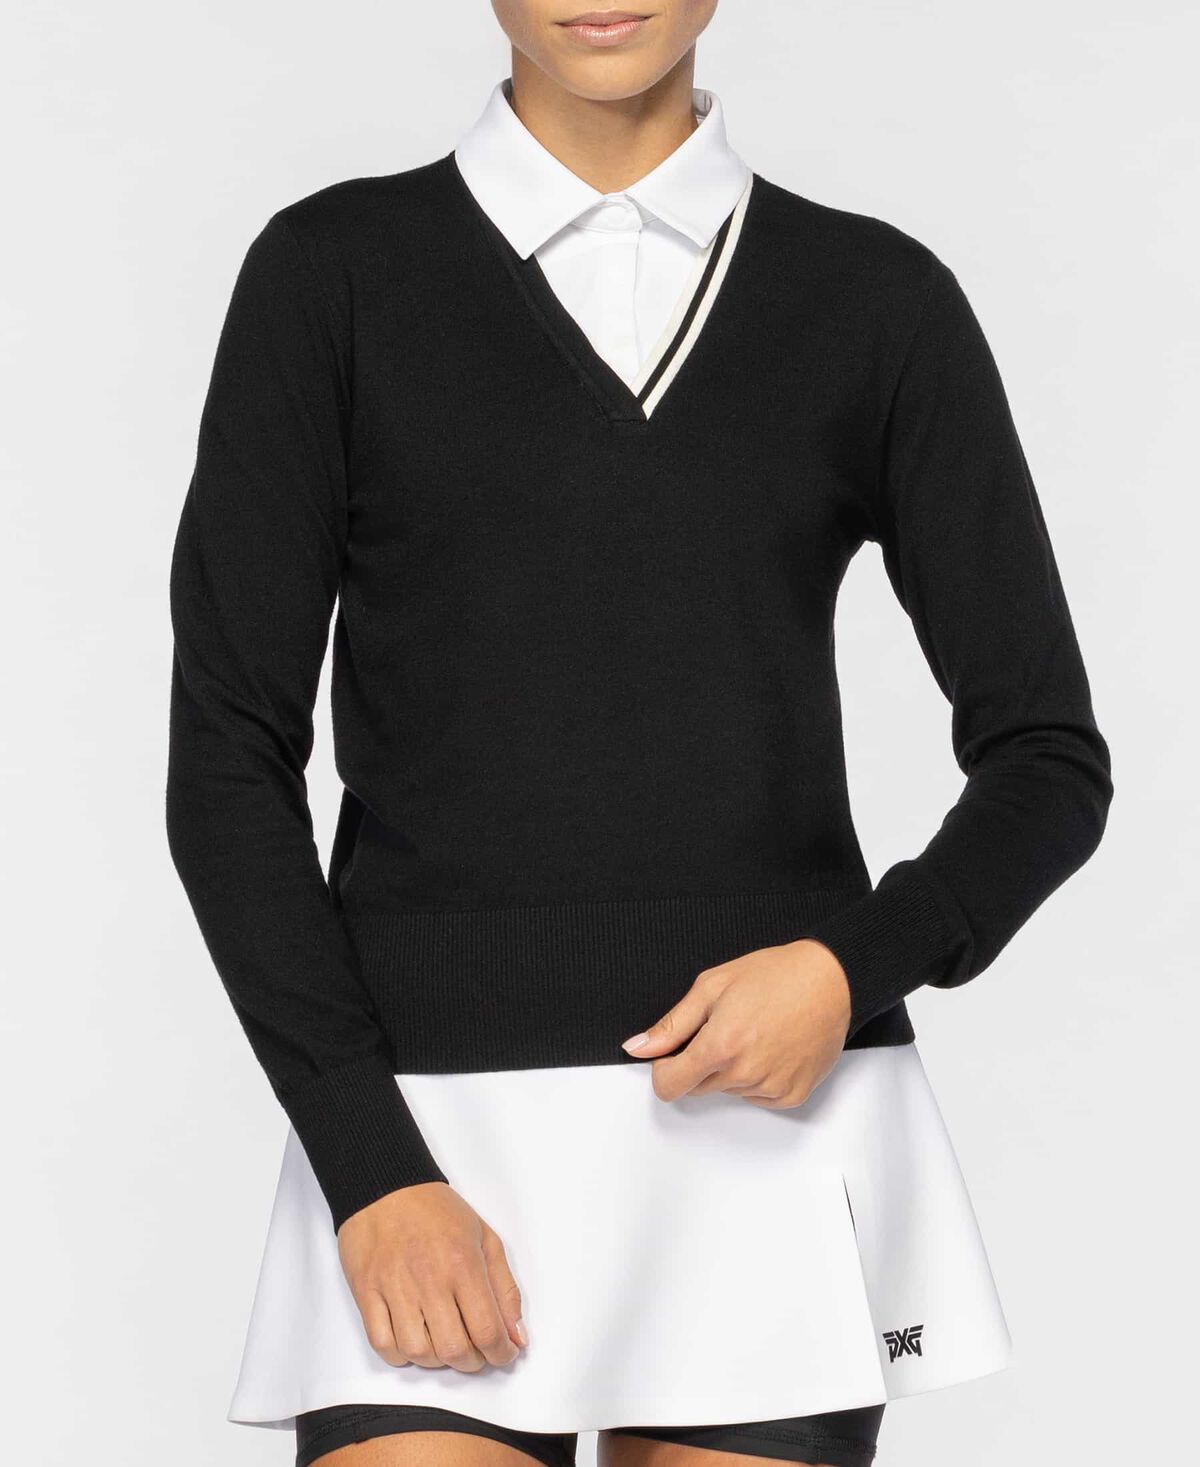 Women's Collared Two-In-One Sweater - Black - X-Large 